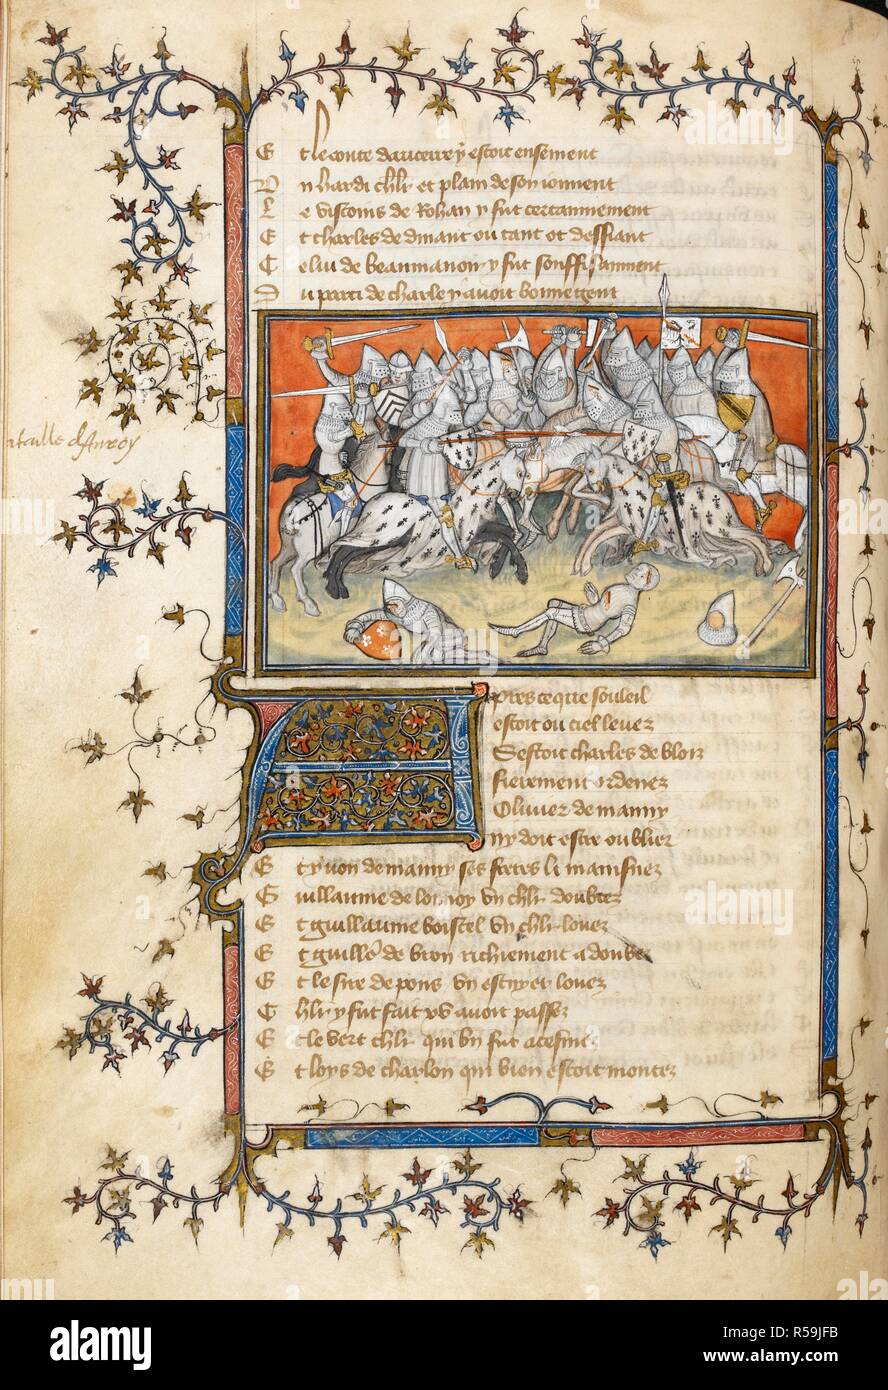 Bertrand Du Guesclin fighting at the battle of Auray. Mounted soldiers in armour with axes and swords. The trappings on the horses and shields are decorated with heraldic emblems. Text with decorated initial 'A'. Life of Bertrand Du Guesclin. France [probably Paris]; circa 1400. Source: Yates Thompson 35, f.90v. Language: French. Author: CUVILIER, JEAN. Stock Photo